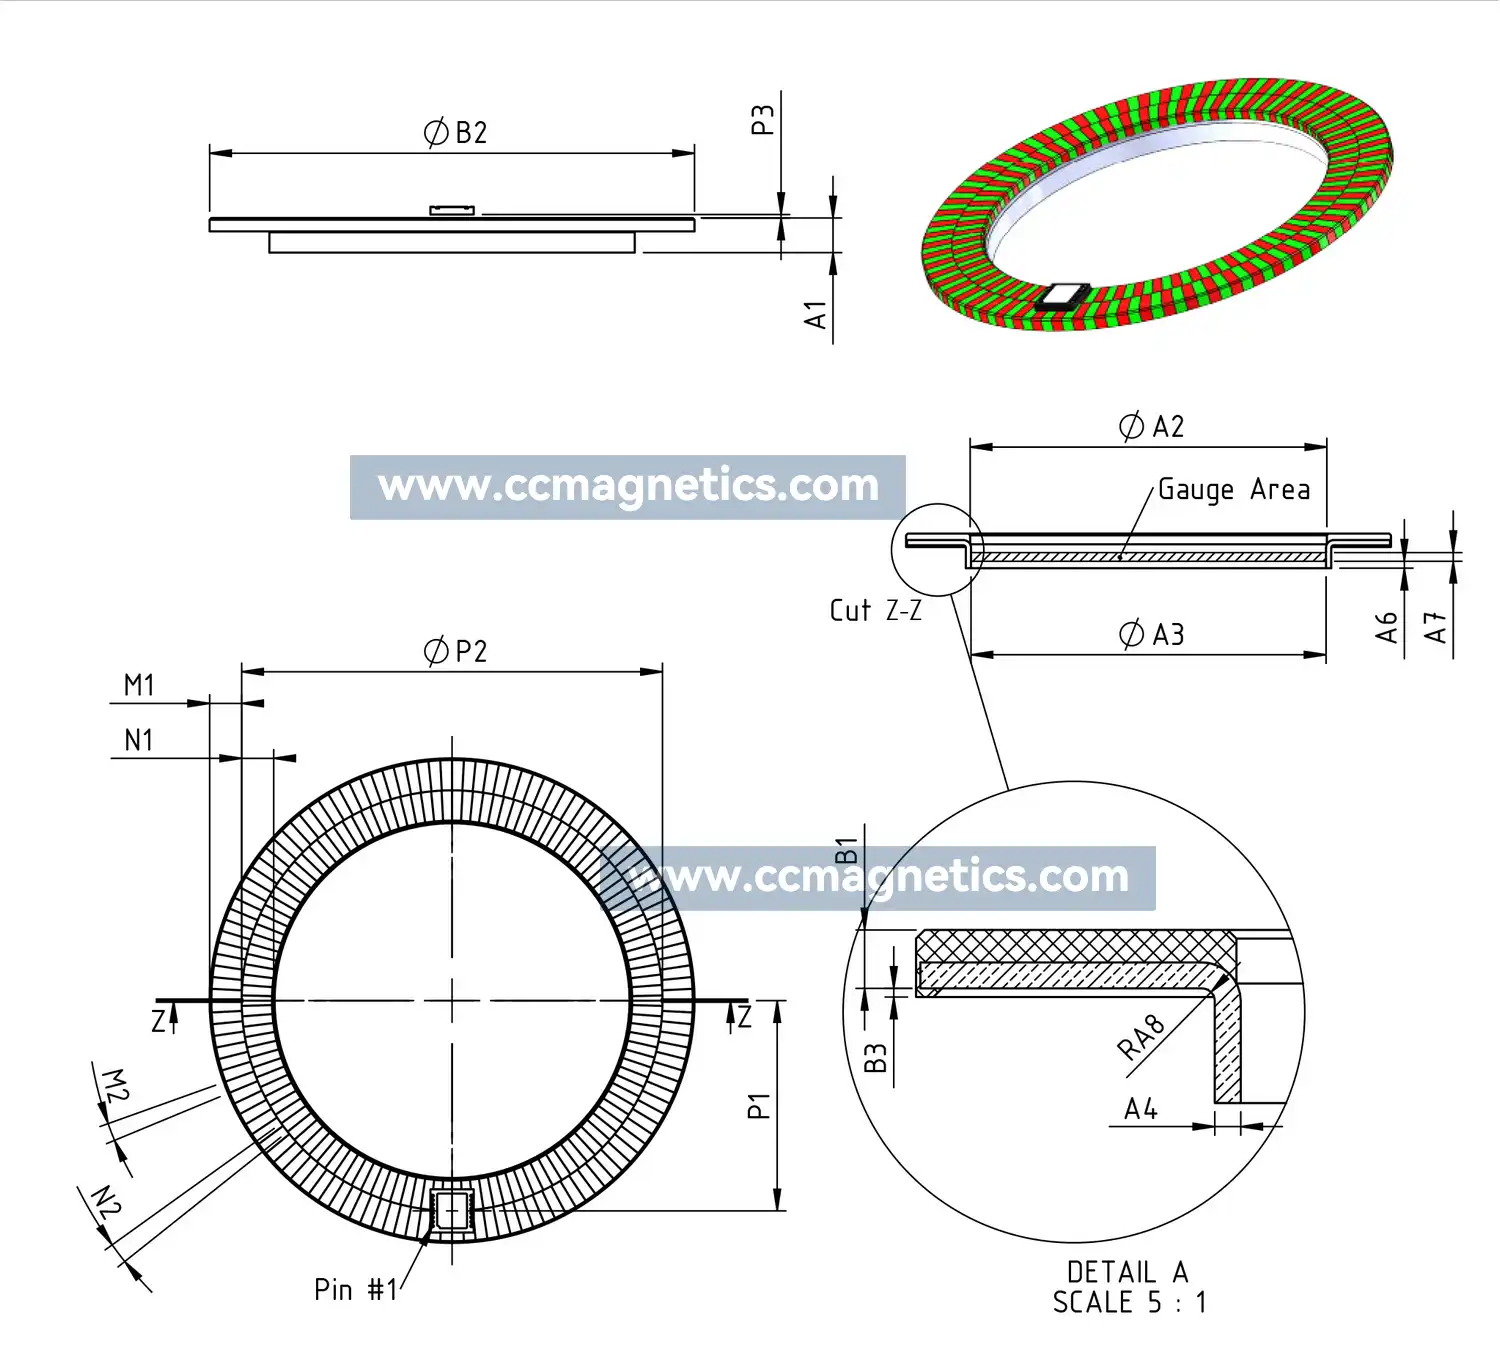 Double-Track Ring Magnets for Absolute Rotary Encoders